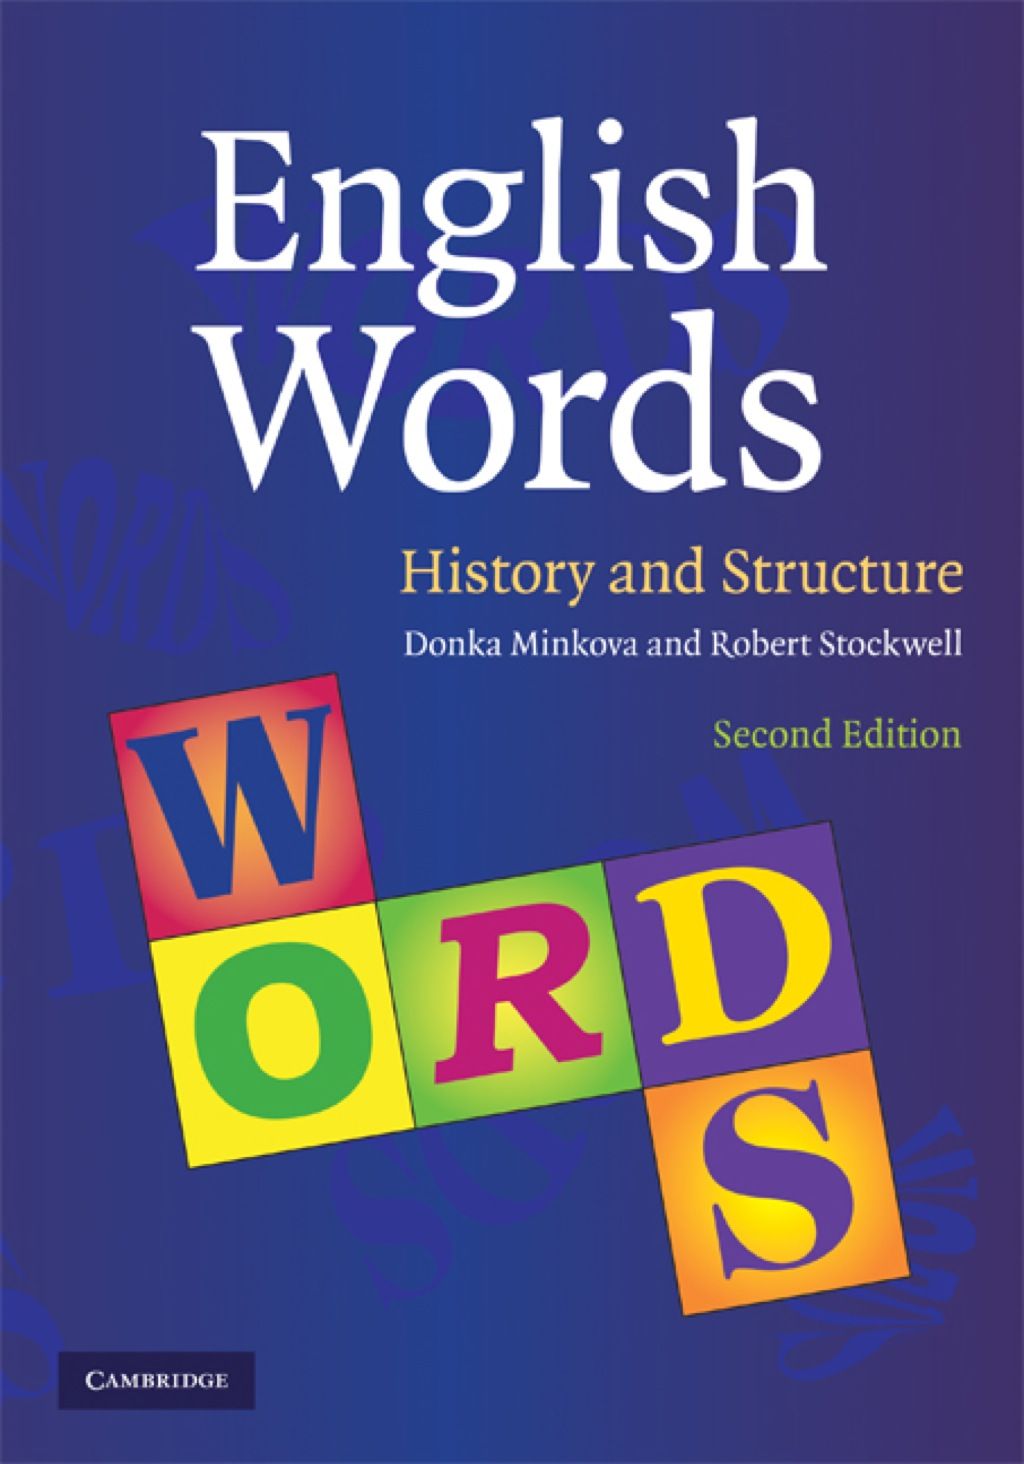 Word book английский. Historical Words. History Word. English book. History слово.